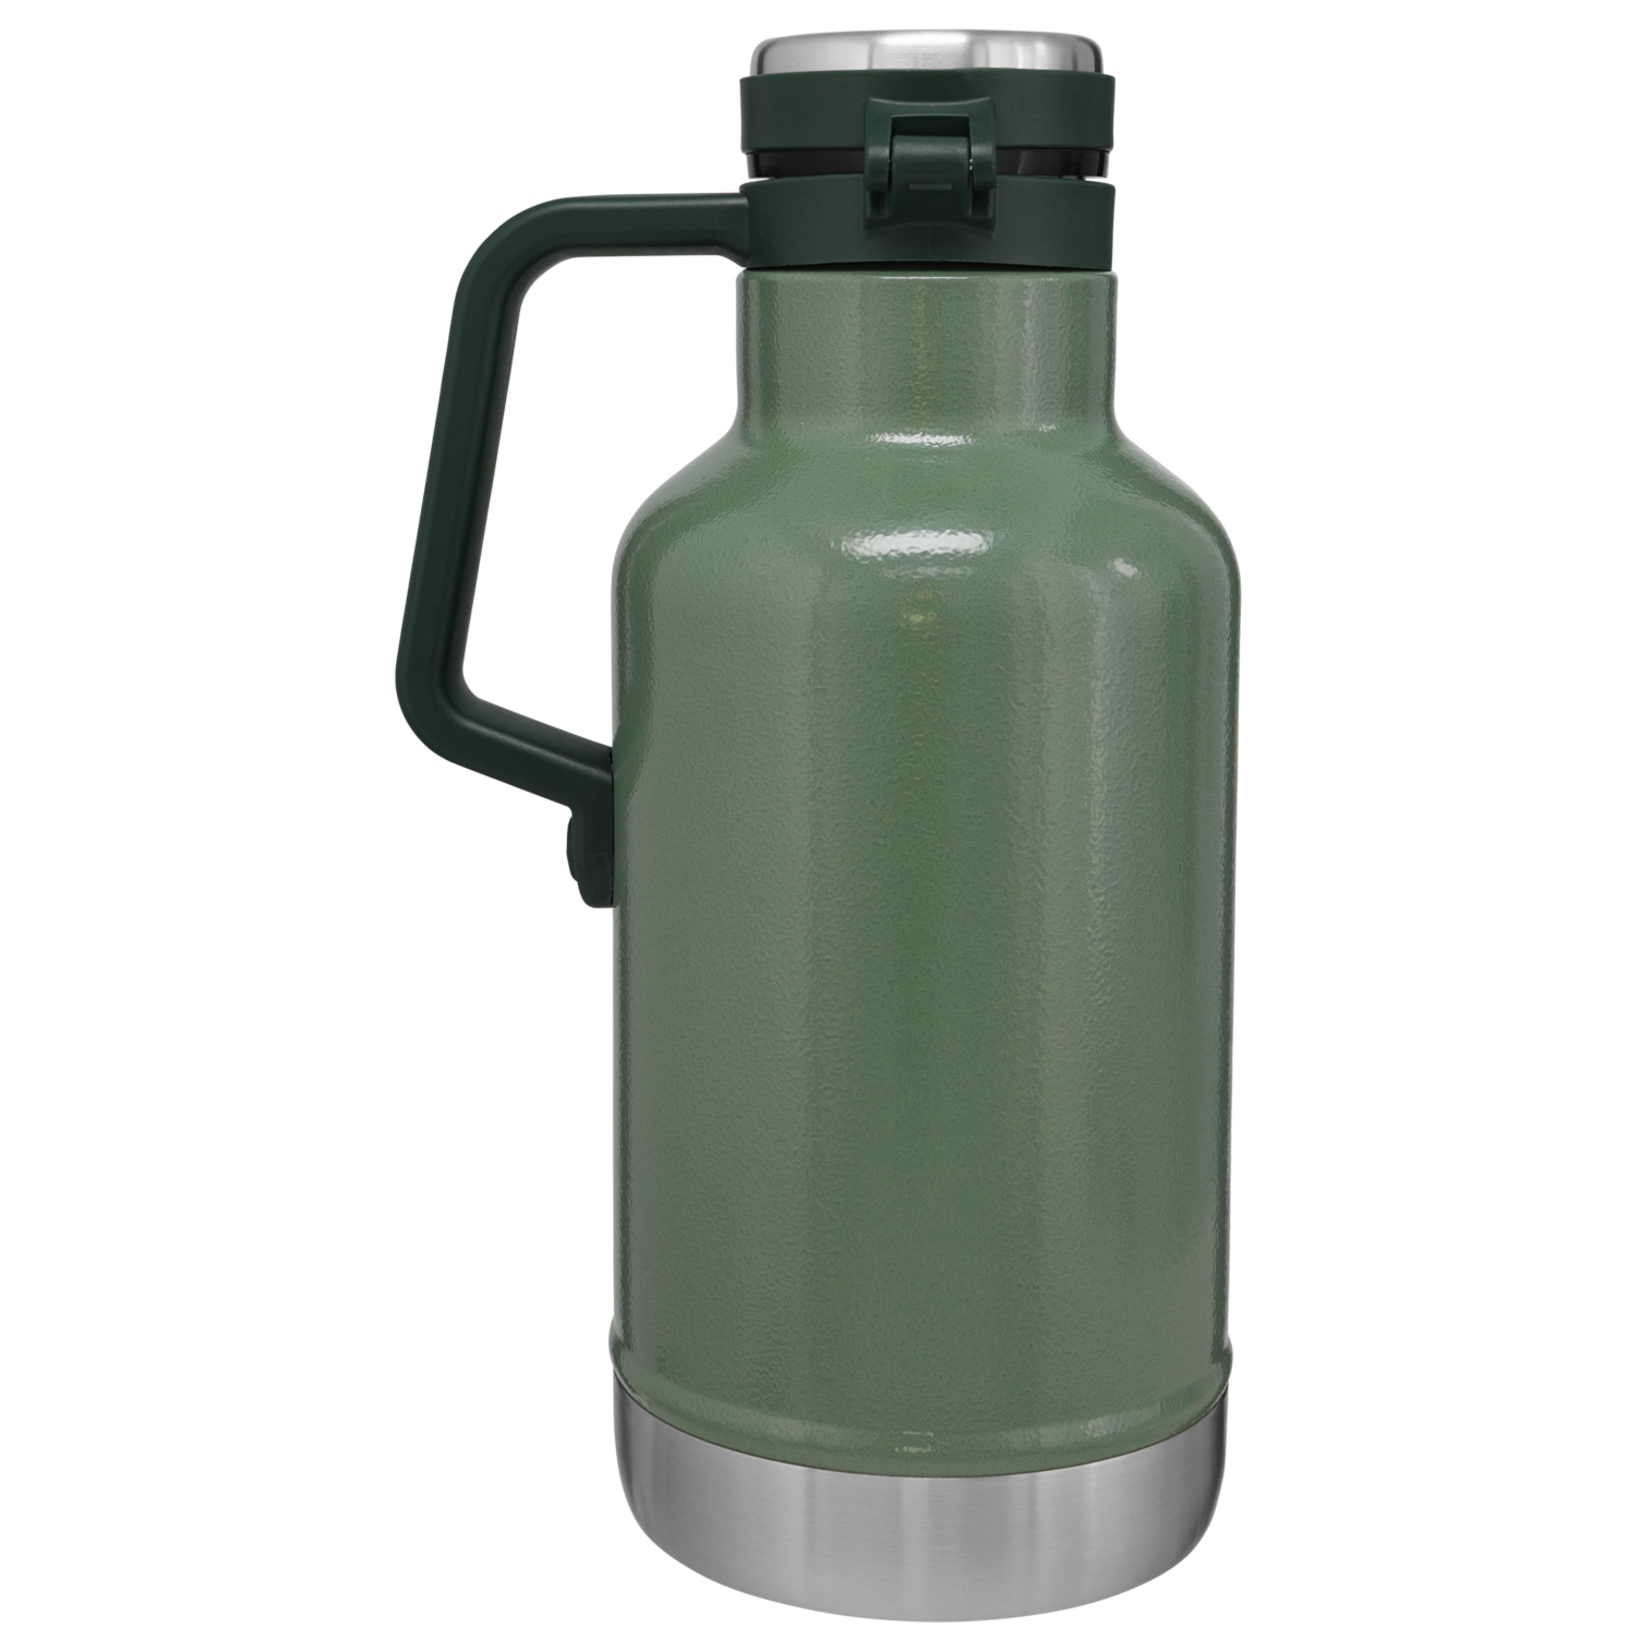 Stanley Stanley Classic Easy-Pour Growler 64 OZ